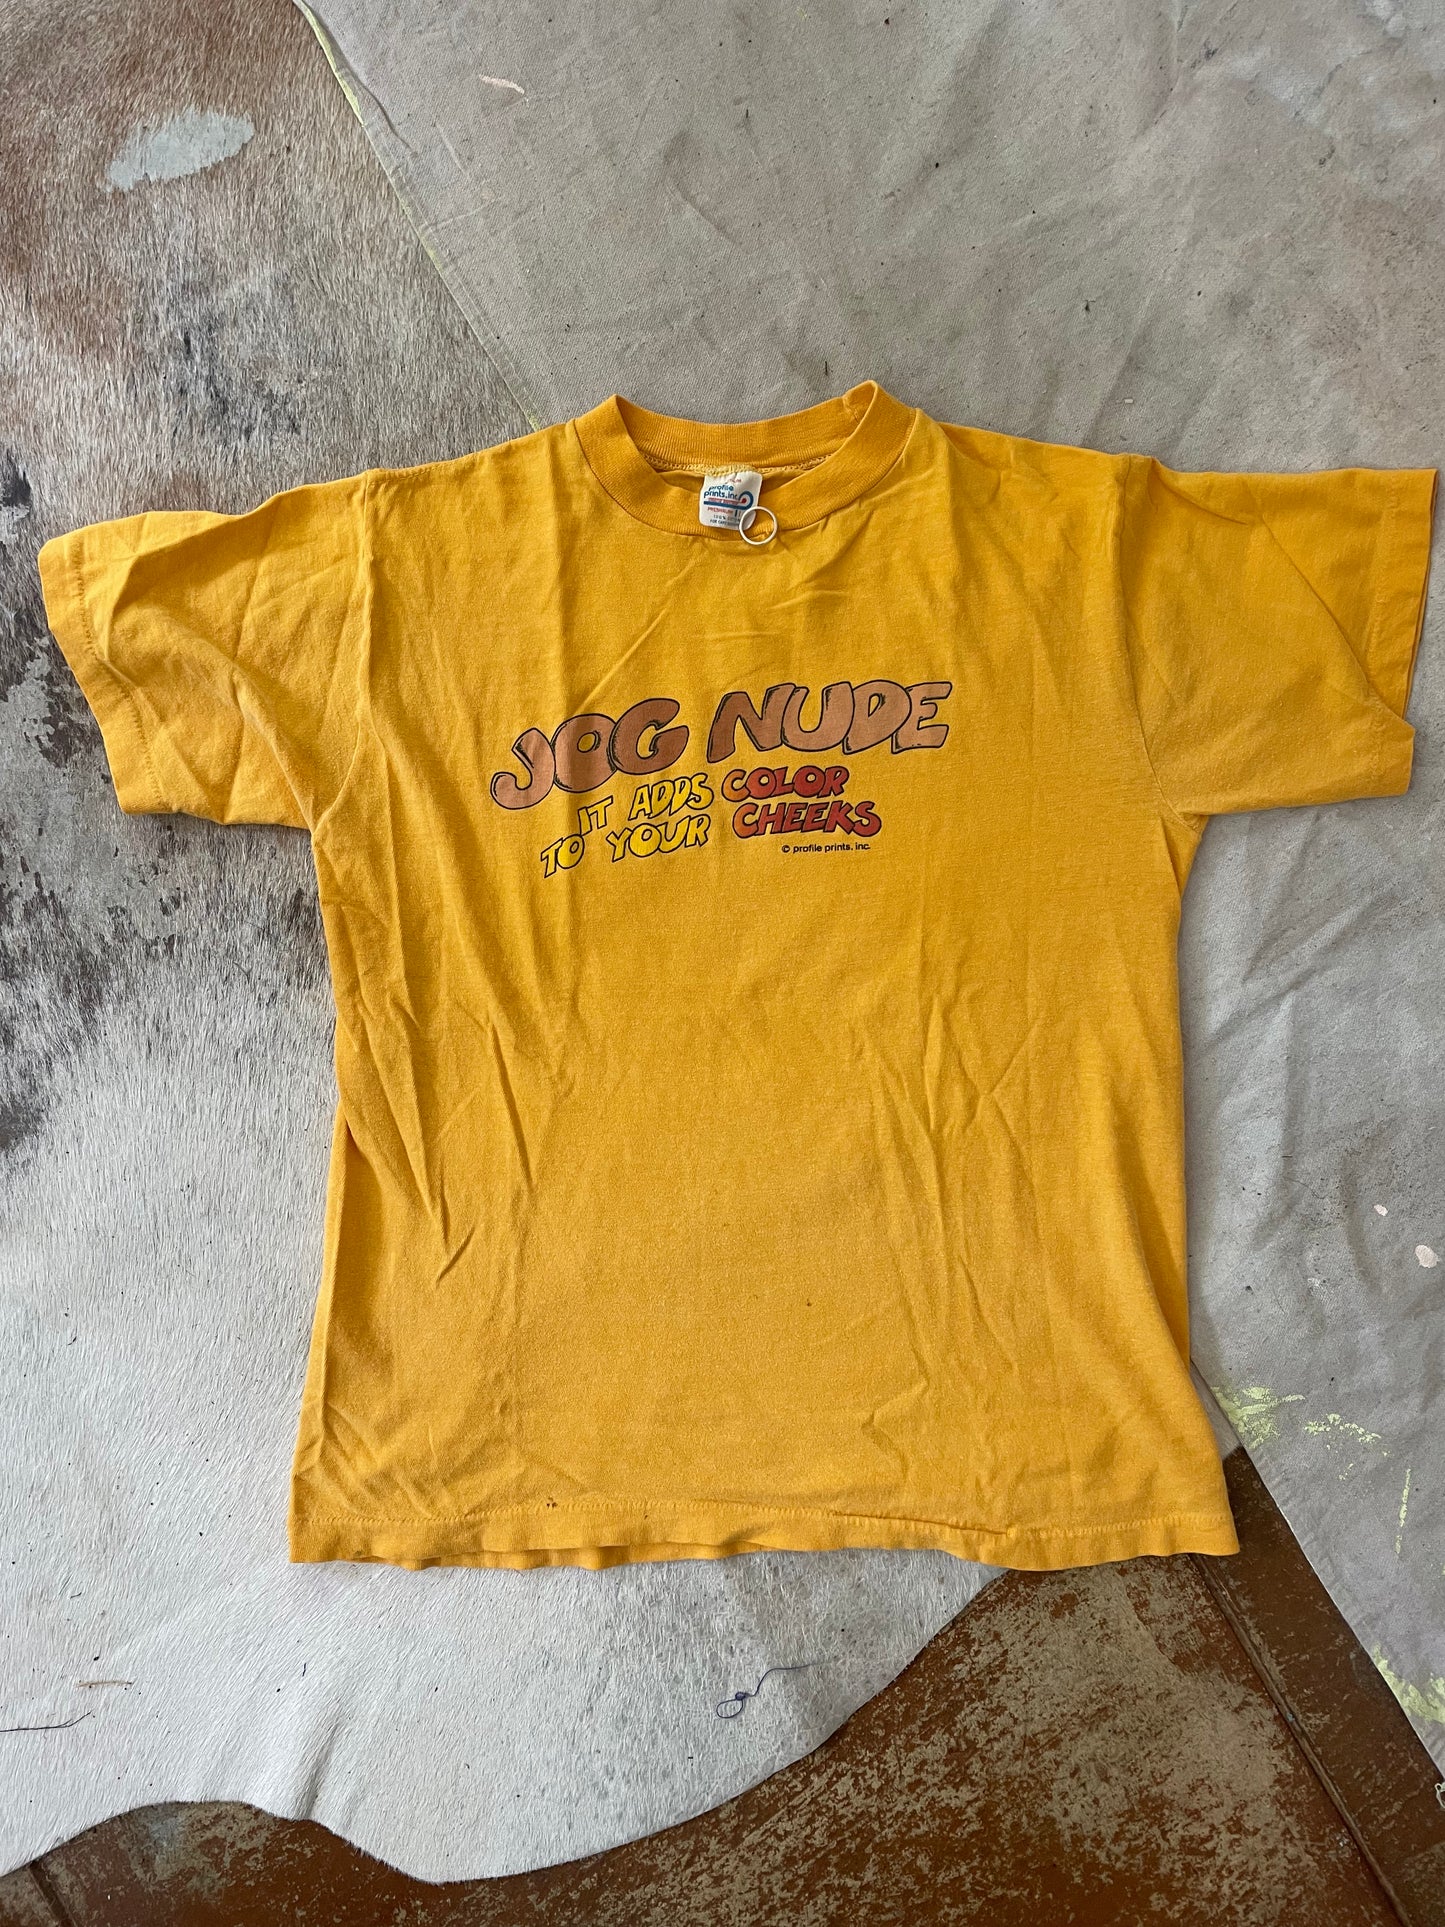 80s Jog Nude It Adds Color To Your Cheeks Tee